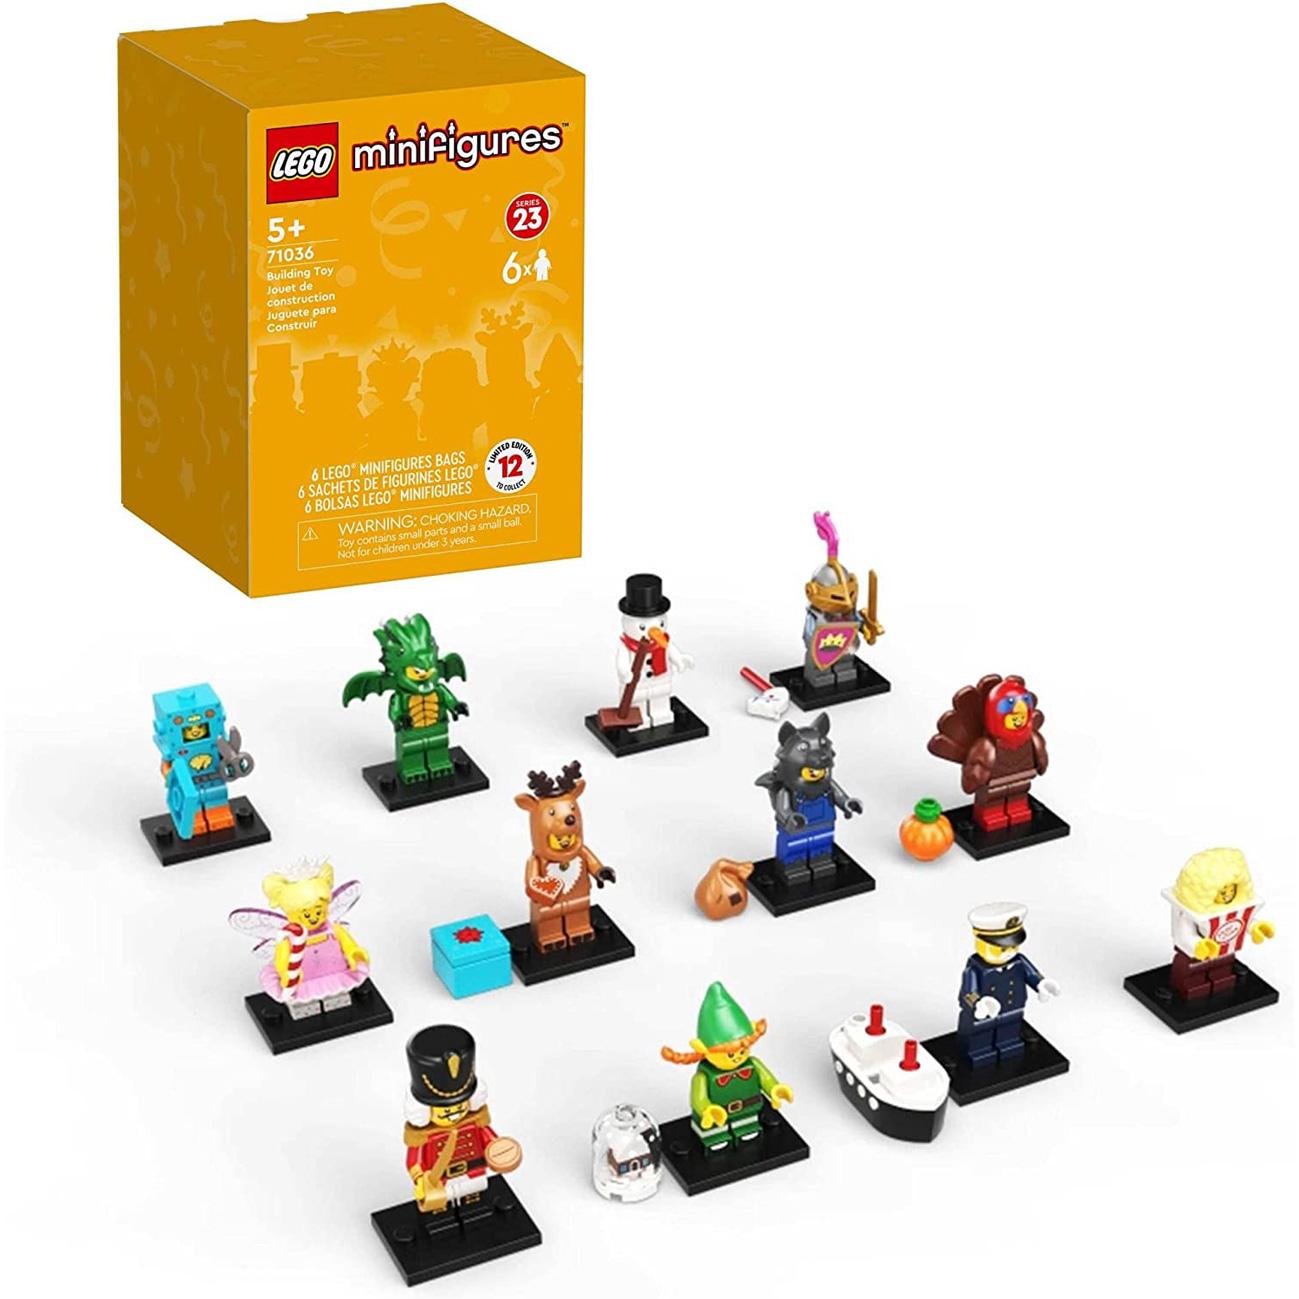 LEGO Minifigures Series 23 Building Toy Set 71036 6 Pack for $20.99